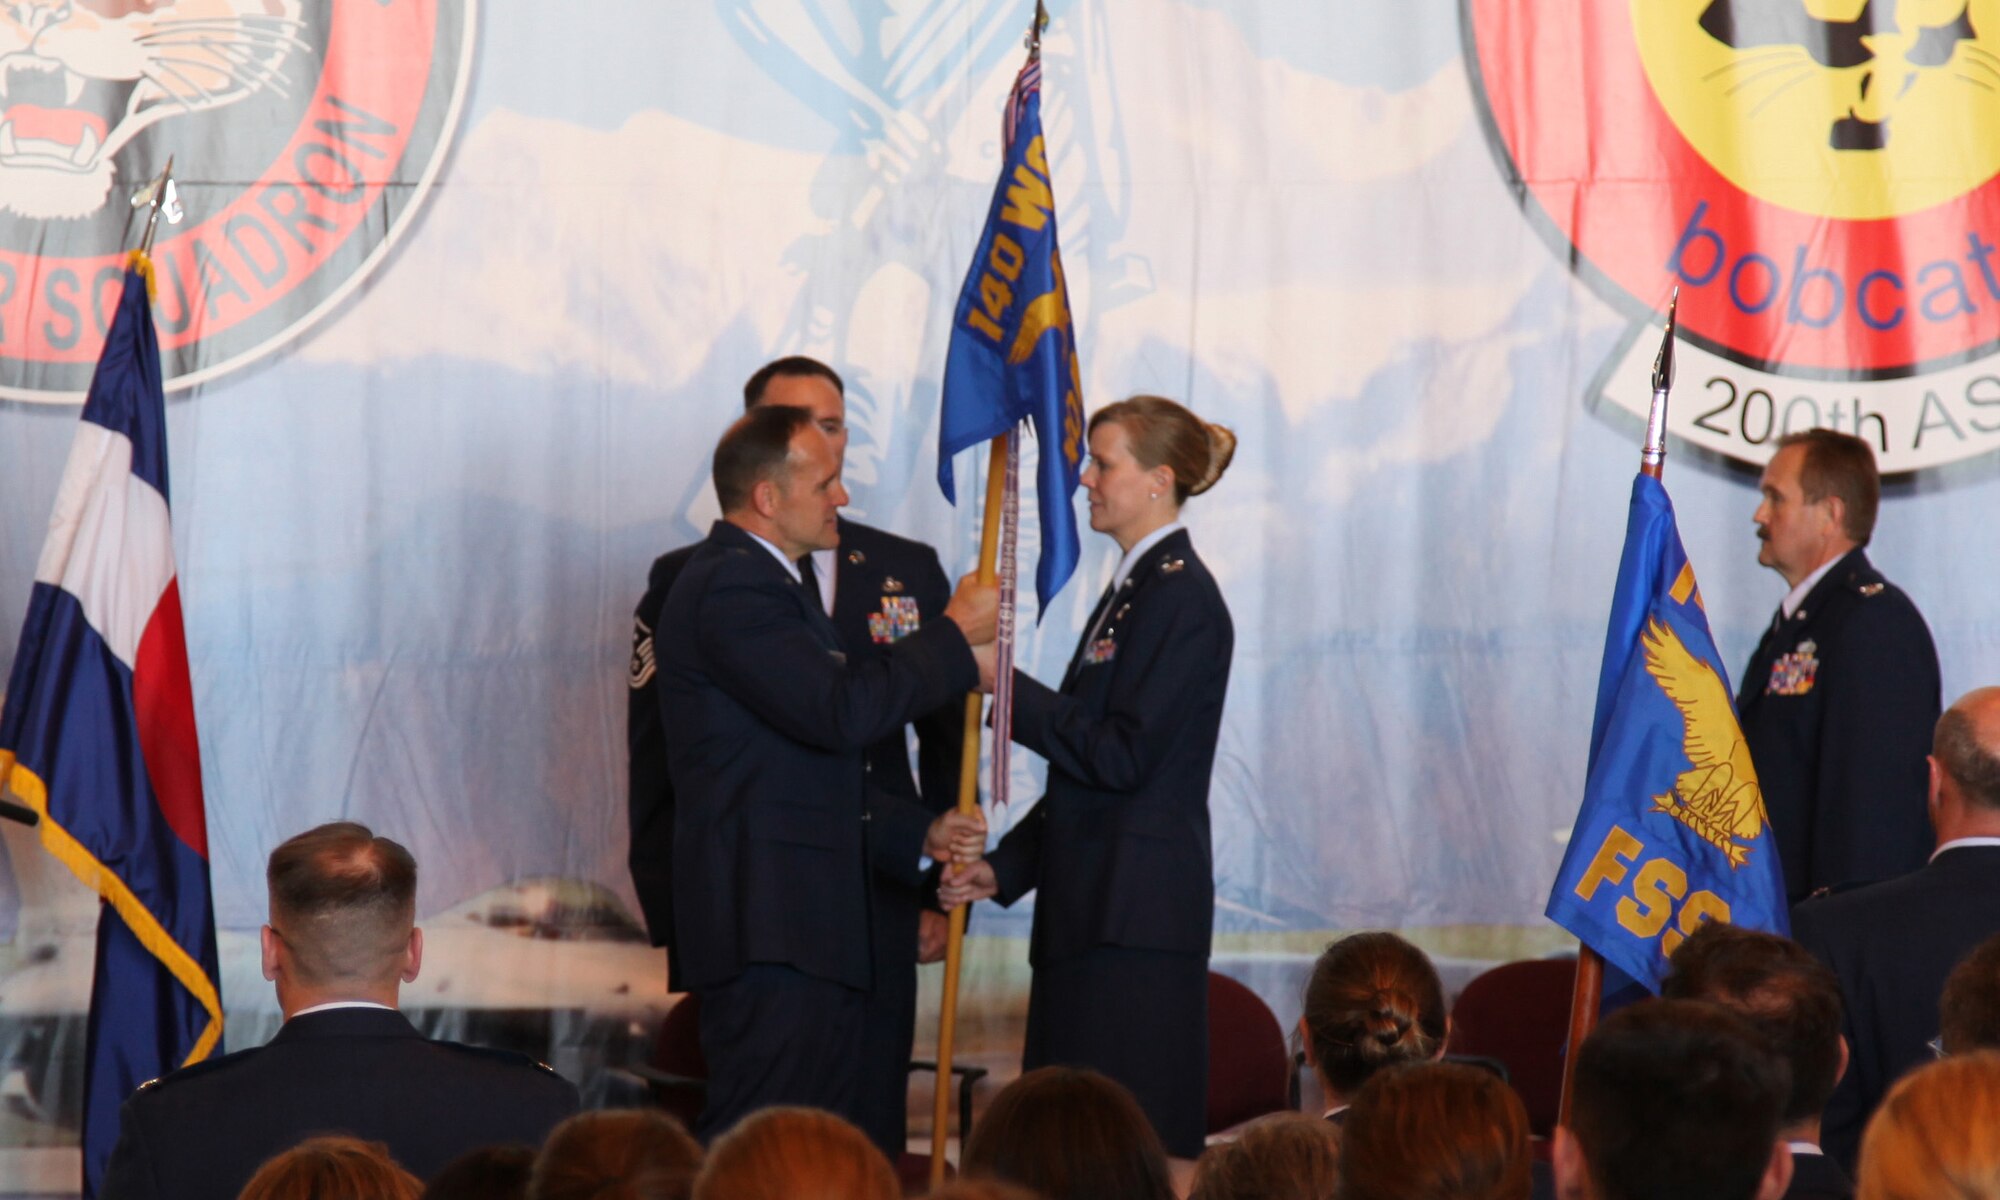 Colonel Barbara C. Morrow is presented with the guidon as she assumes command of the 140th Mission Support Group, 140th Wing, Colroado Air National Guard at Buckley Air Force Base June 5.